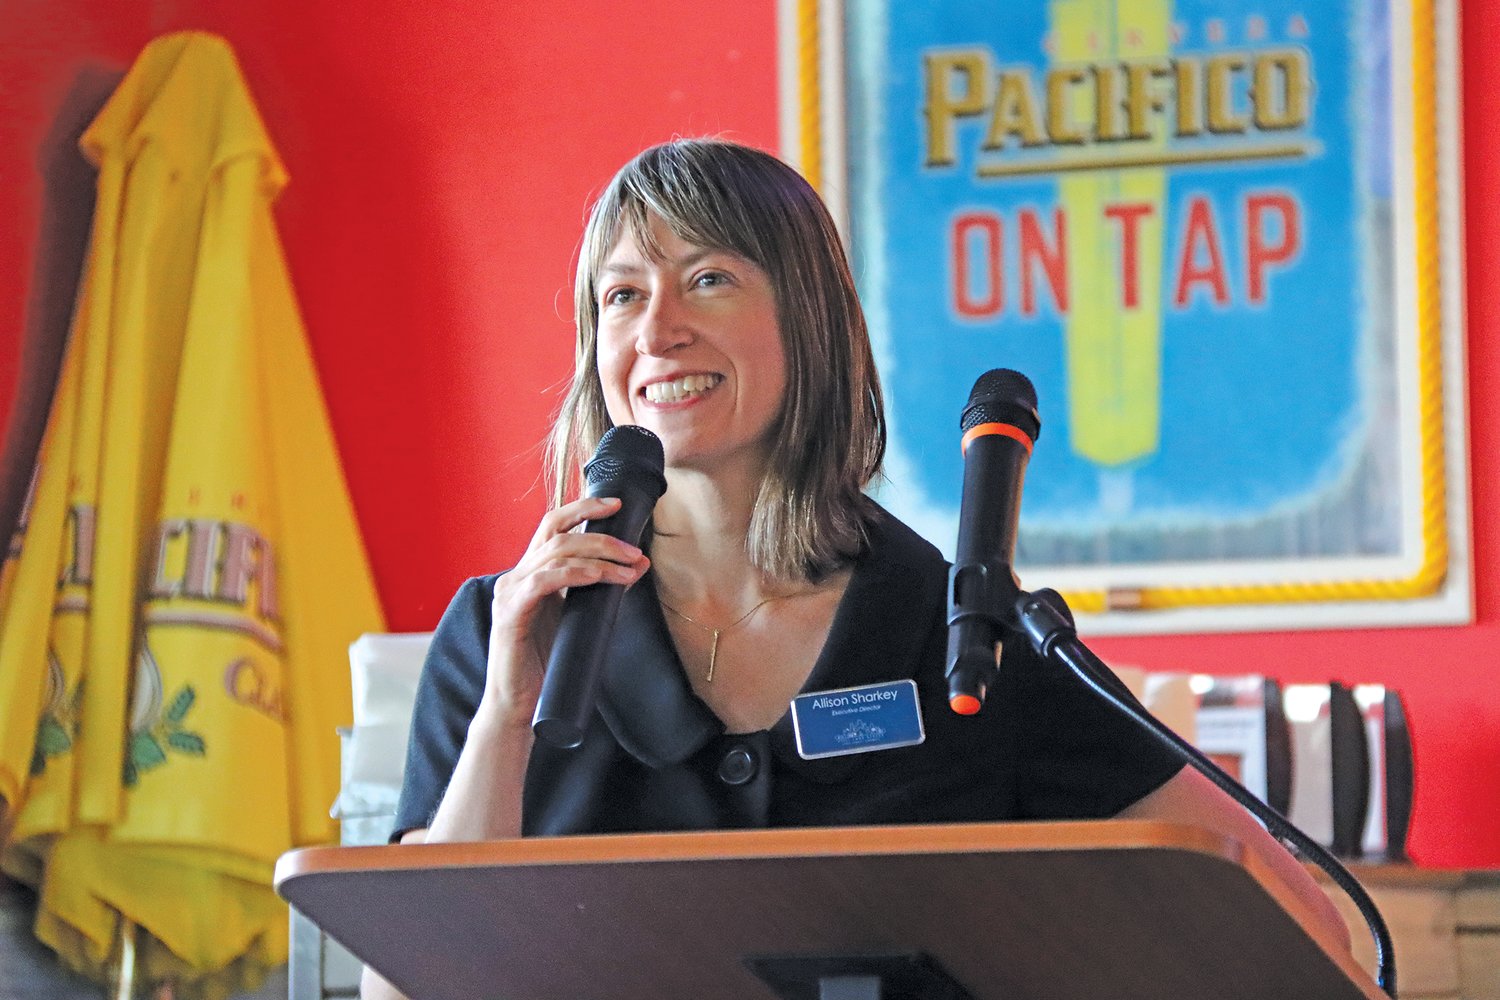 Lake Street Council Executive Director Allison Sharkey said, “Each of us was called to not only help rebuild our community, but also to help address the deep-seated inequities that got us here.”  (Photo by Tesha M. Christensen)